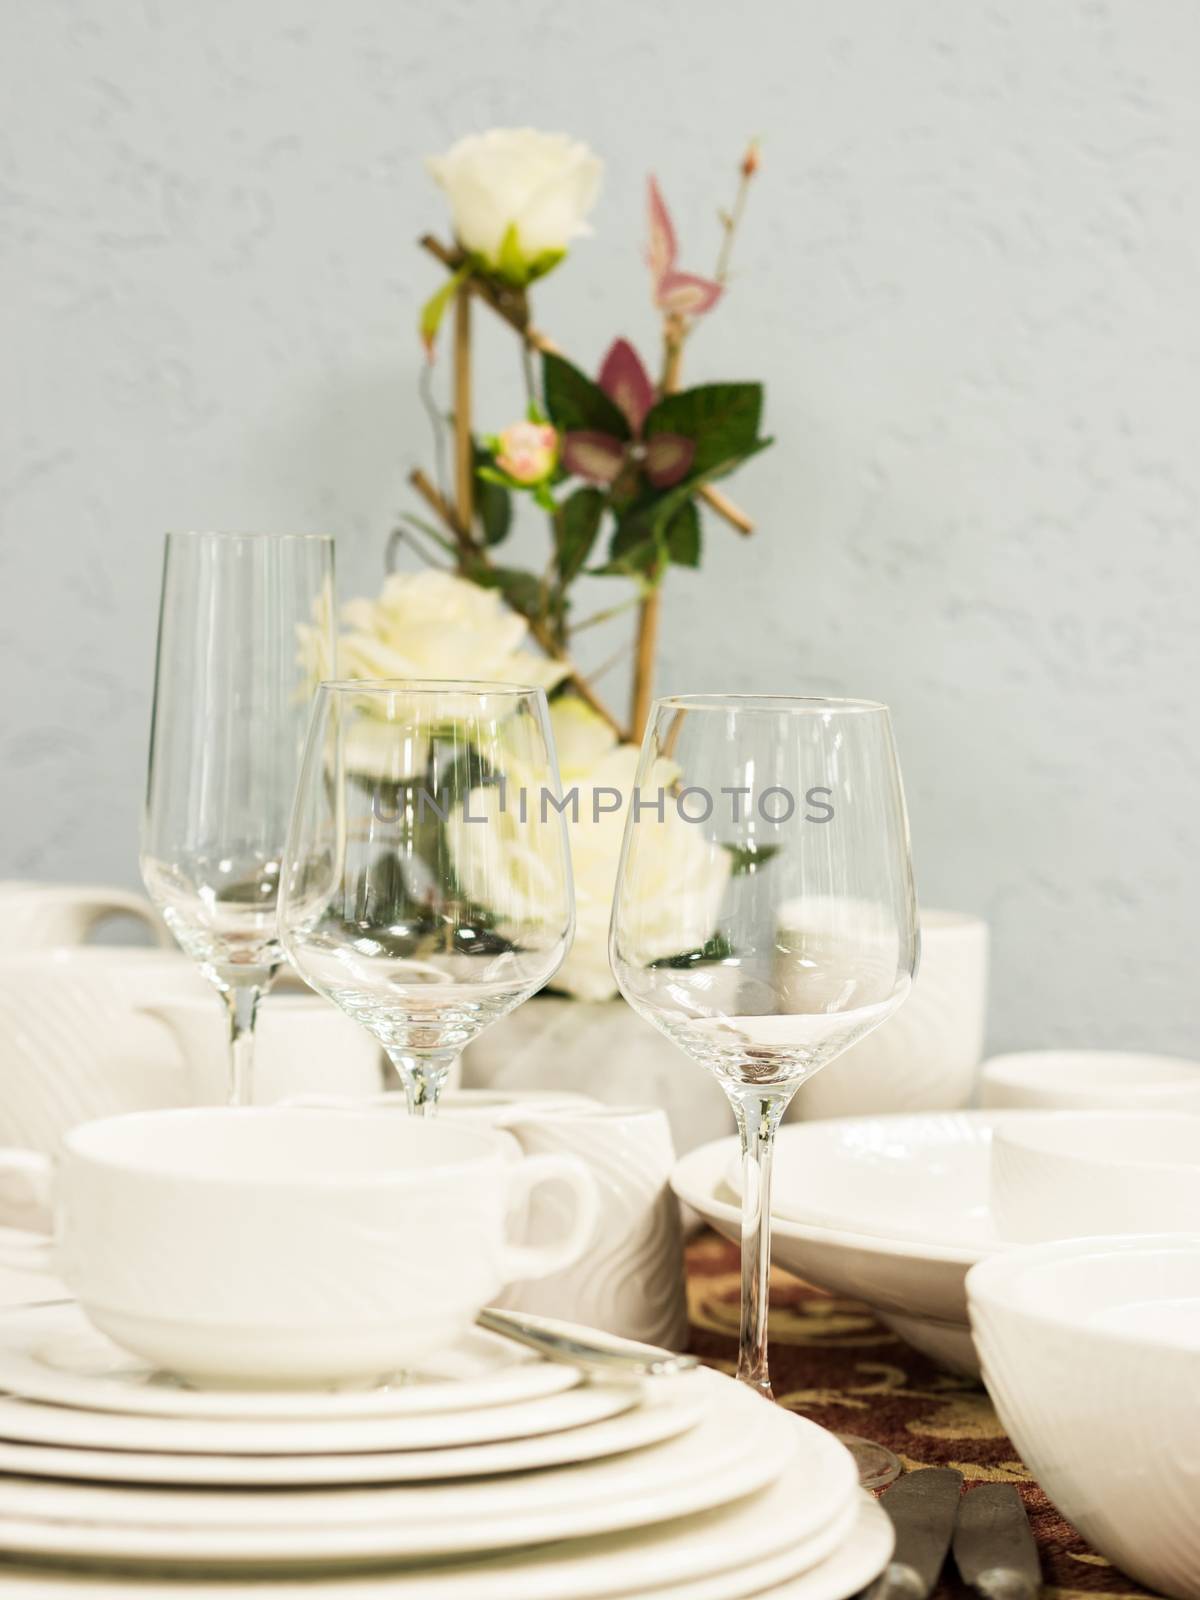 Set of new dishes on table with tablecloth. Stack of white plates and wine glasses with flowers on restaurant table. Vertical. Shallow DOF